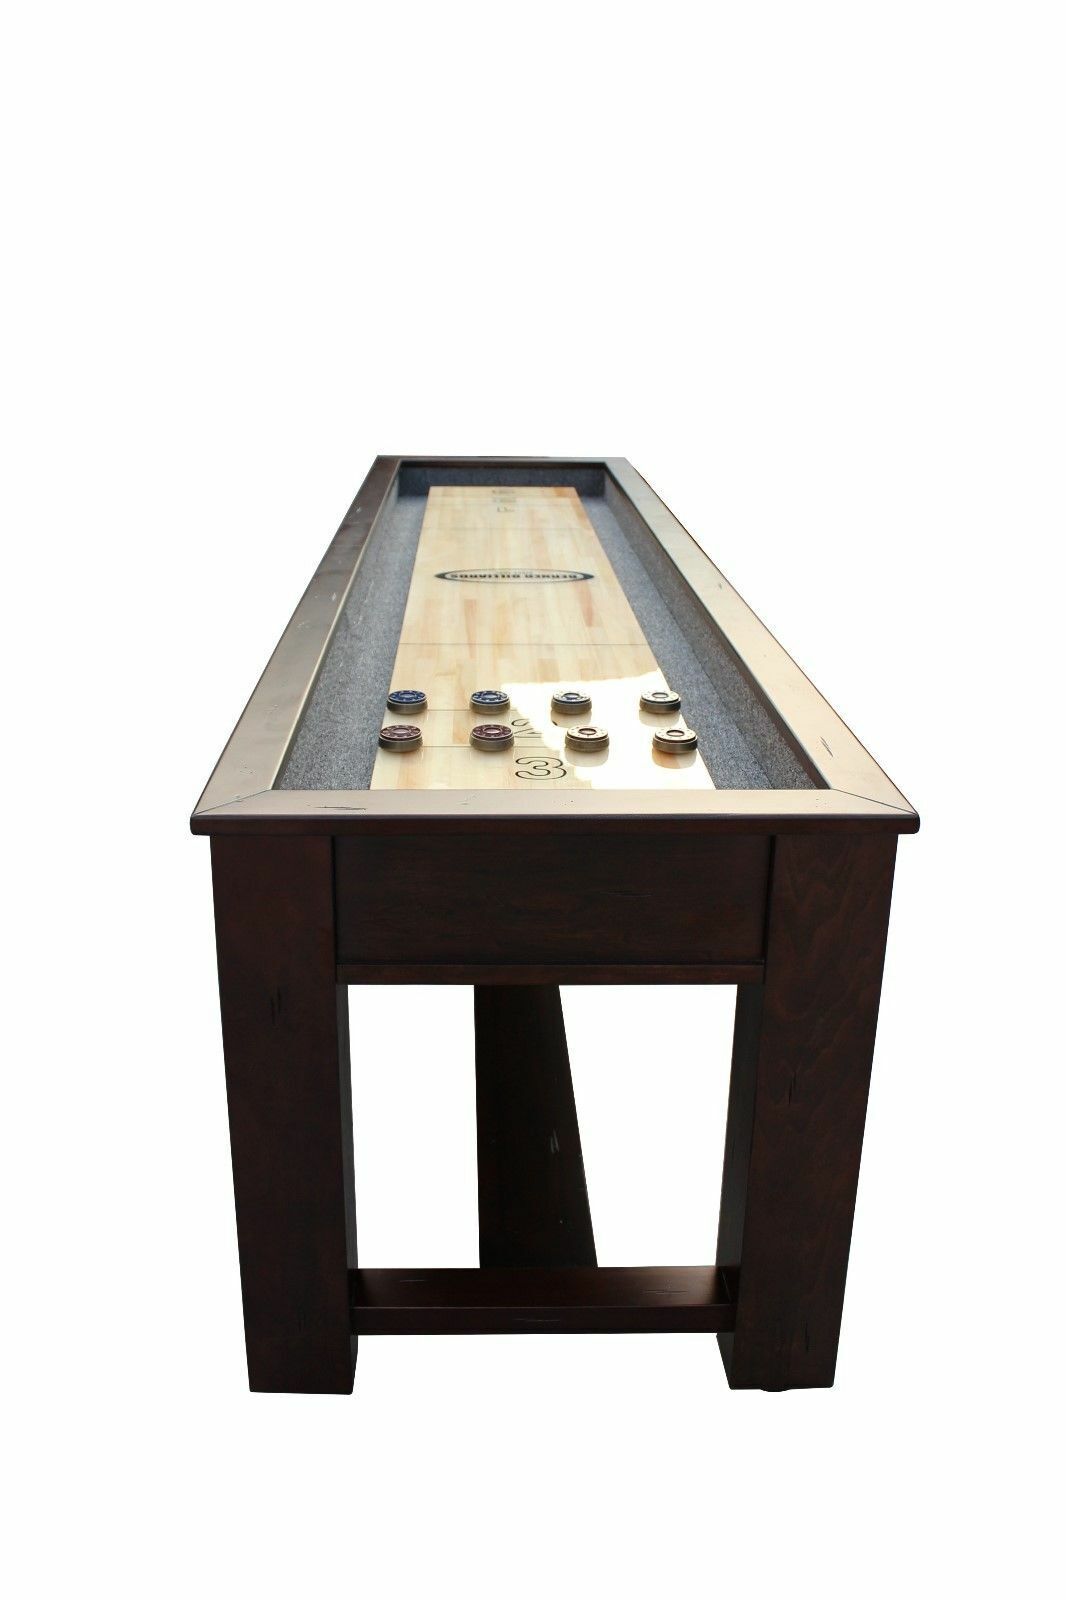 "The Rustic" Shuffleboard Table by Berner Billiards in Walnut - Planet Game Rooms